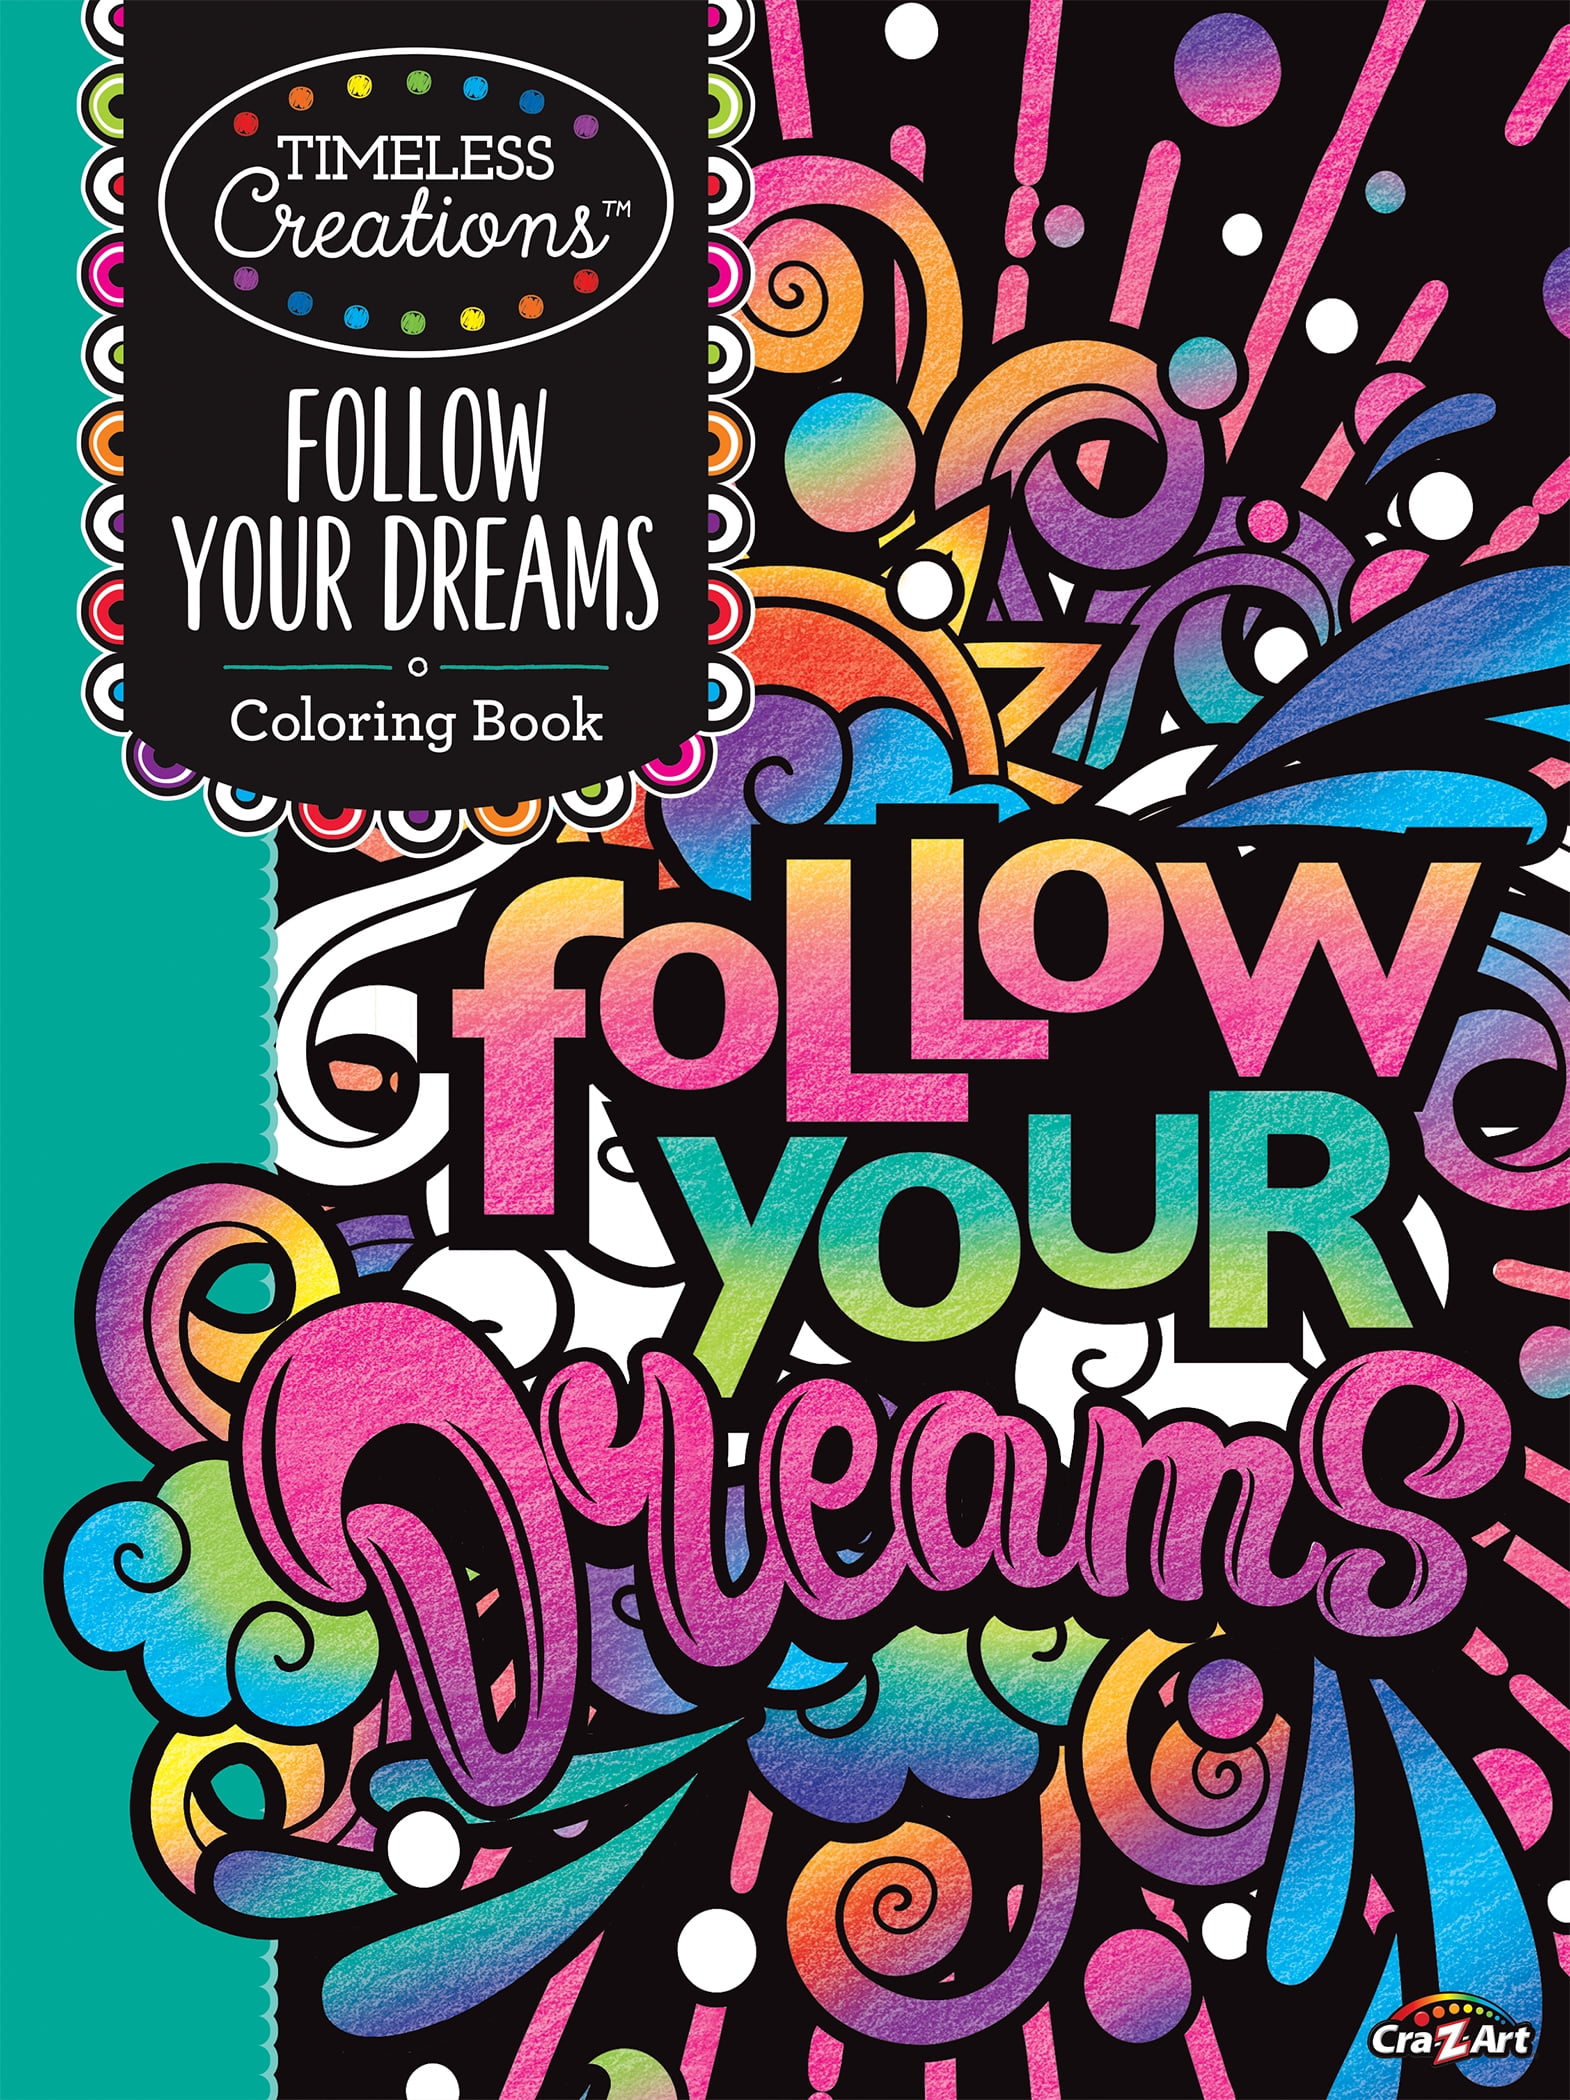 Timeless Creations “FOLLOW YOUR DREAMS” Adult Coloring Book w/ 64 Pages for  Sale in Miramar, FL - OfferUp